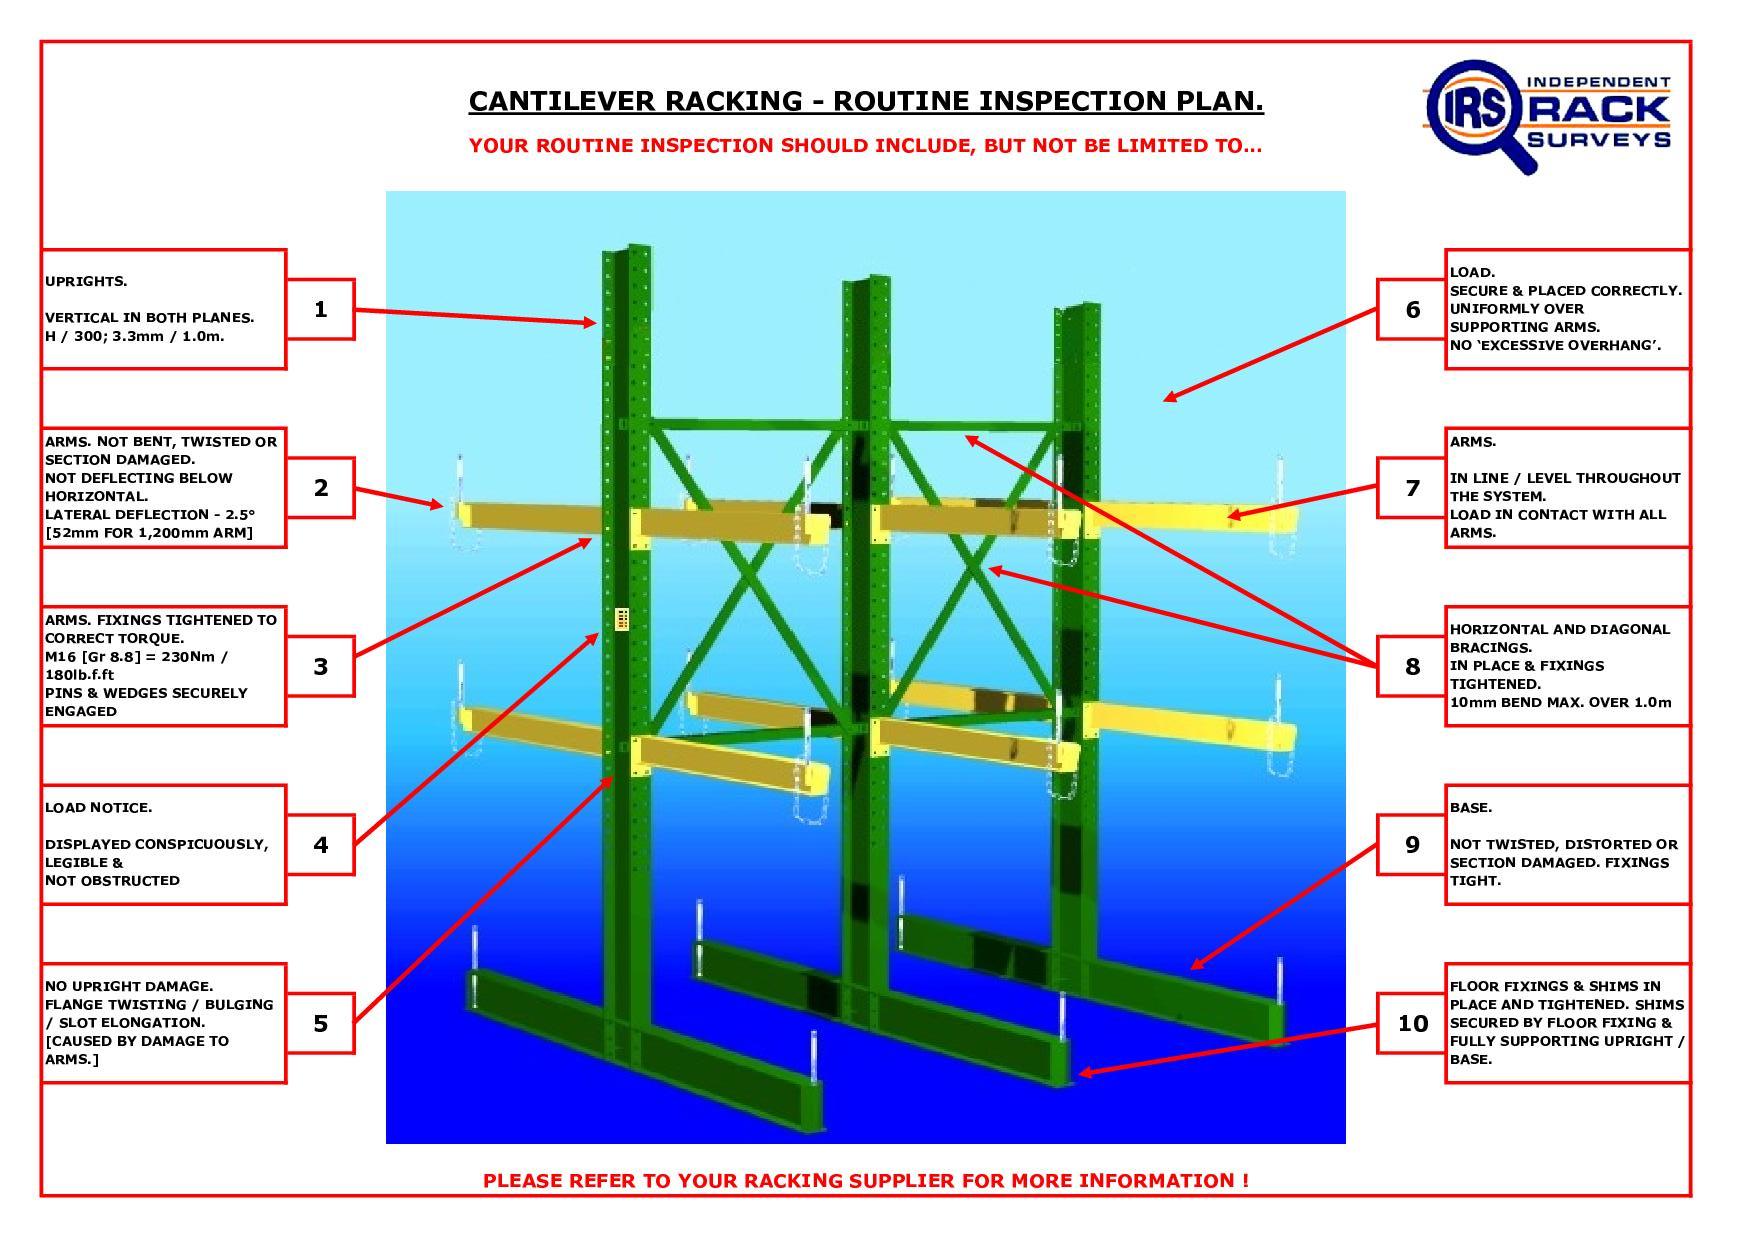 05 - Cantilever Racking Routine Inspection Plan.